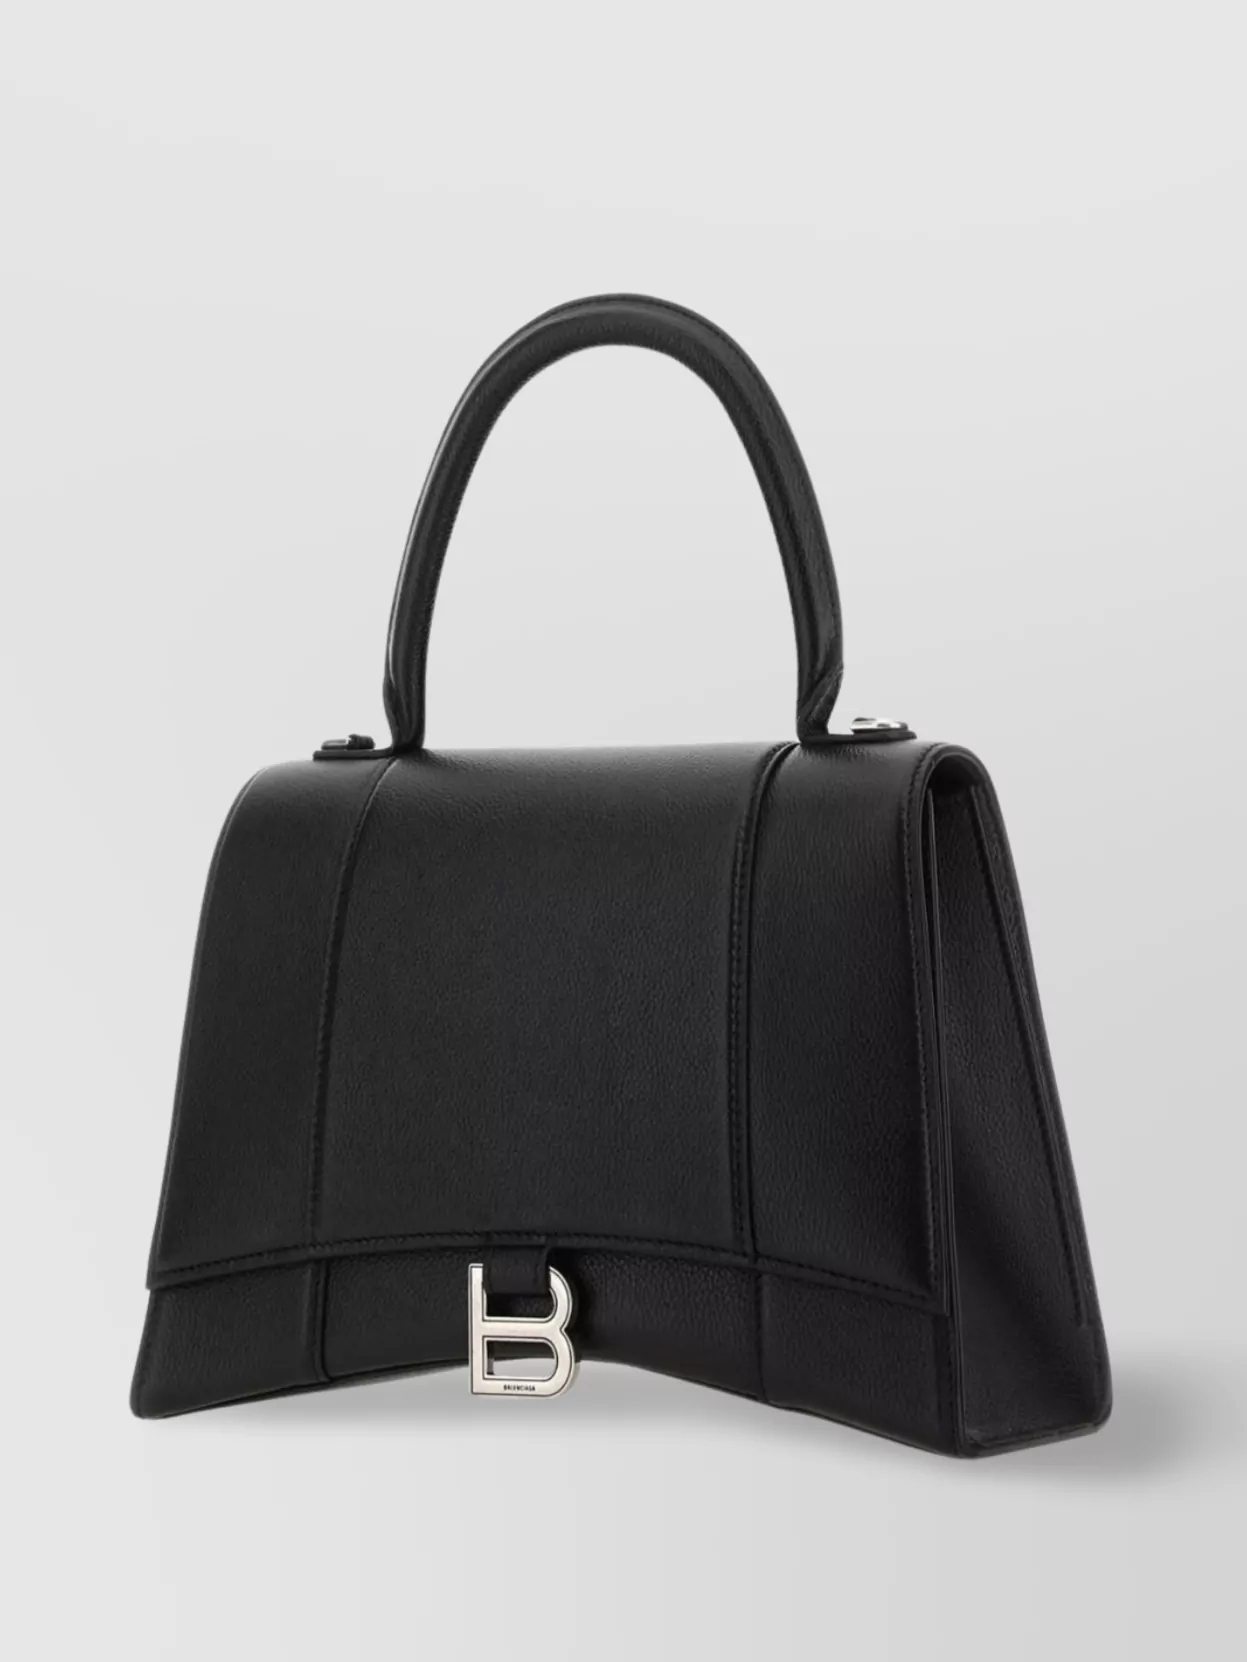 Shop Balenciaga Hourglass Handbag With Structured Silhouette And Top Handle